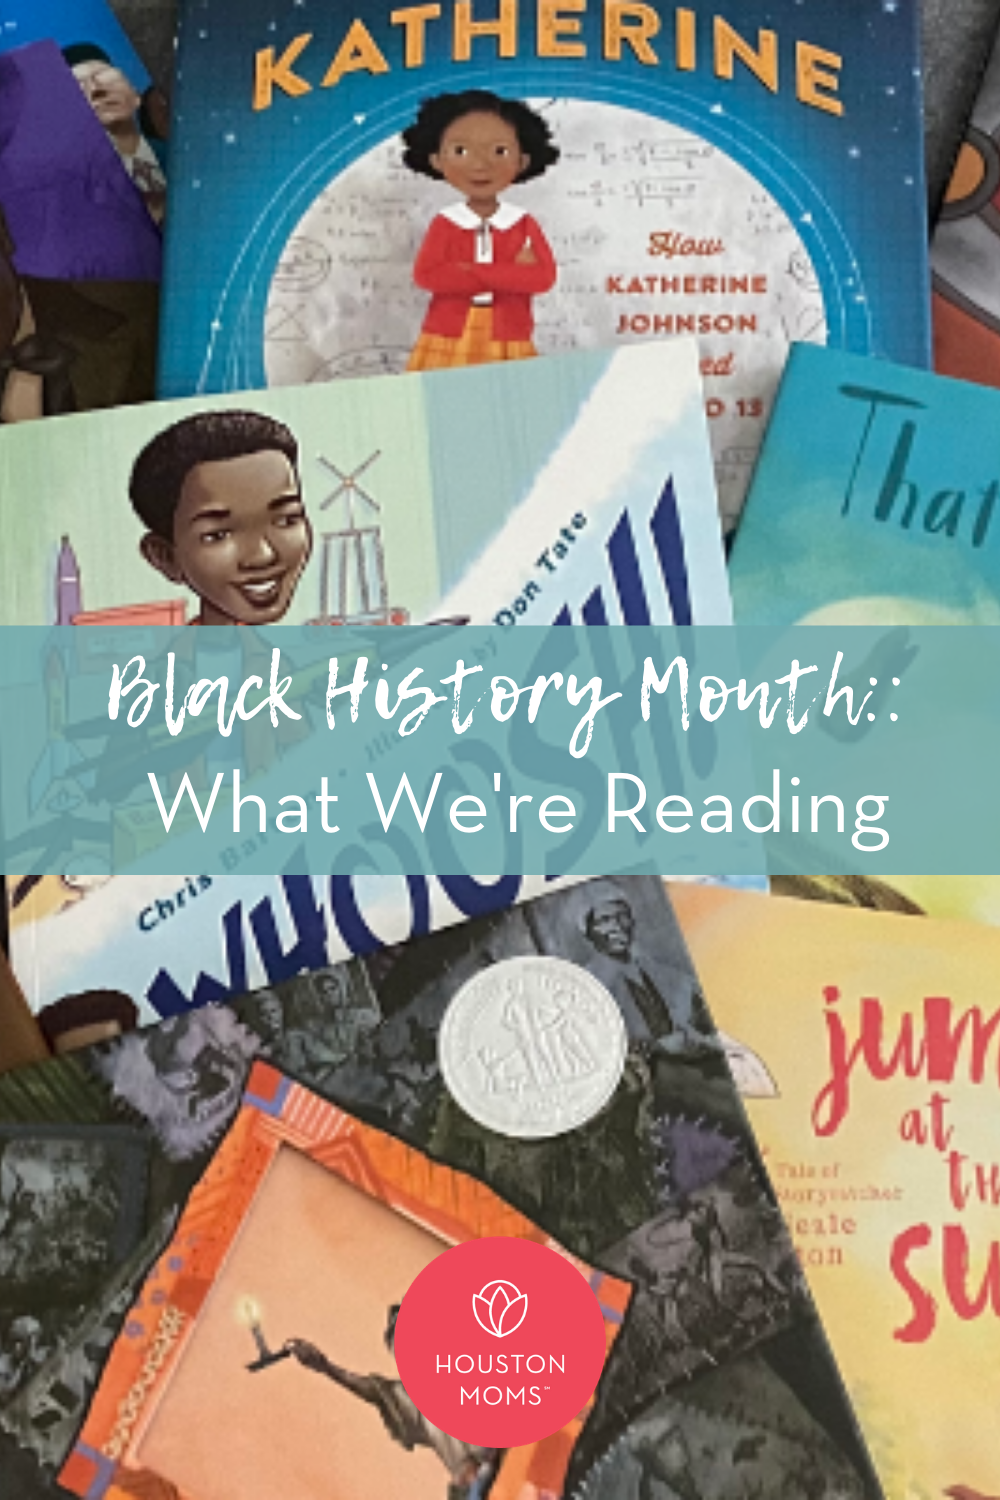 Houston Moms "Black History Month: What We're Reading" 